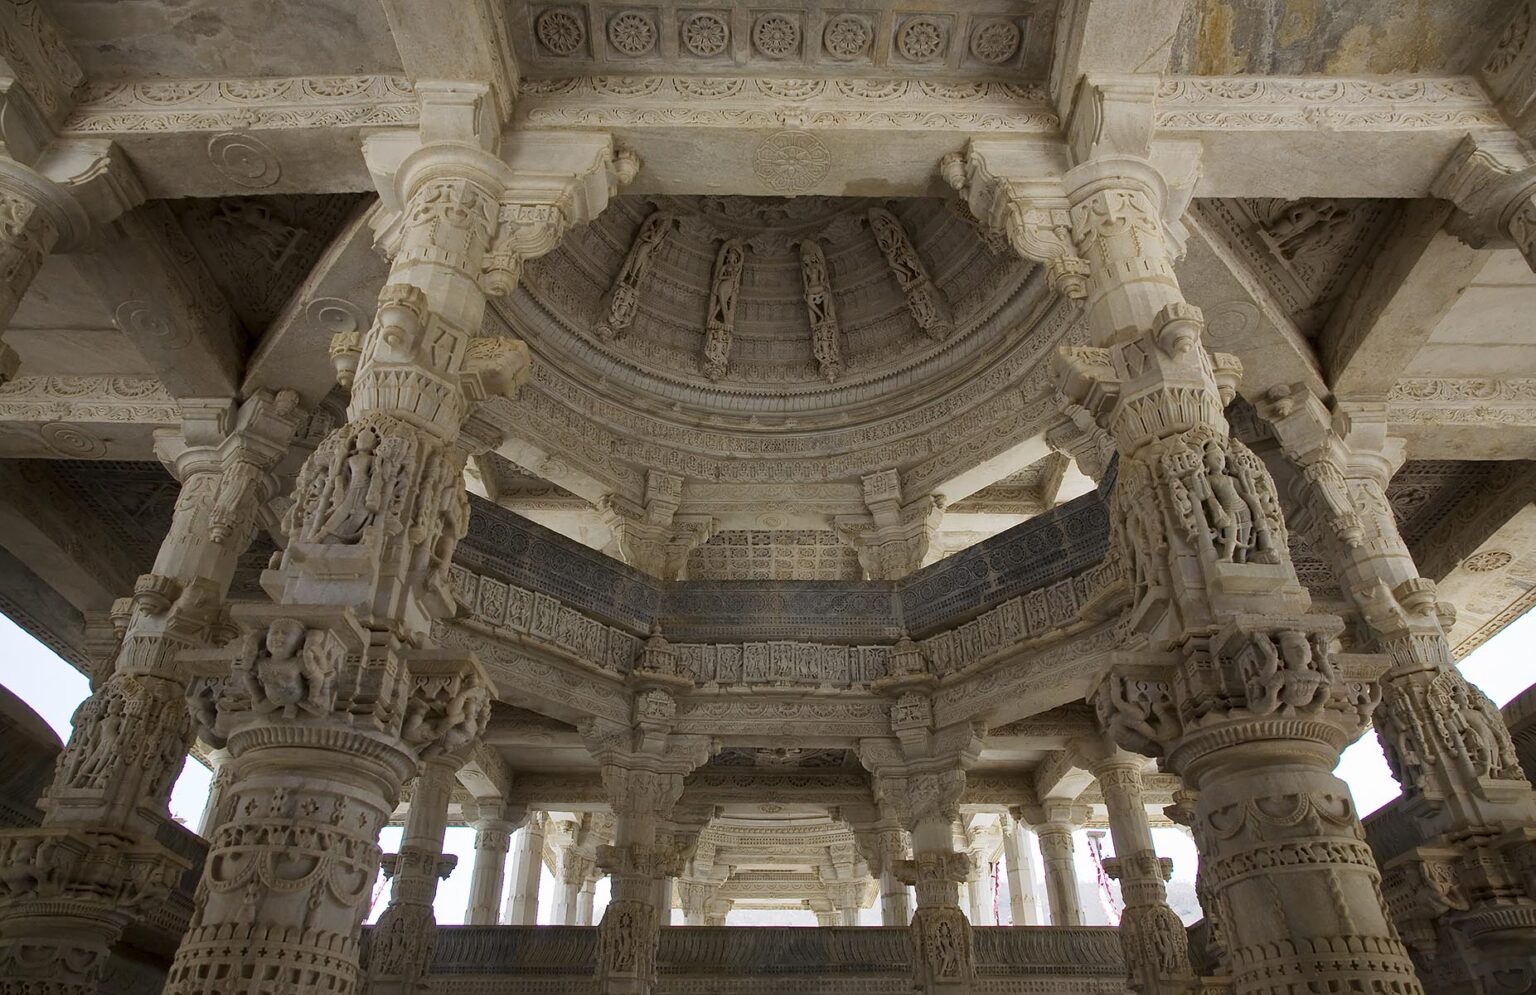 The CHAUMUKHA MANDIR TEMPLE at RANAKPUR in the Pali District of RAJASTHAN near Sadri has 1440 carved pillars with no two alike - INDIA